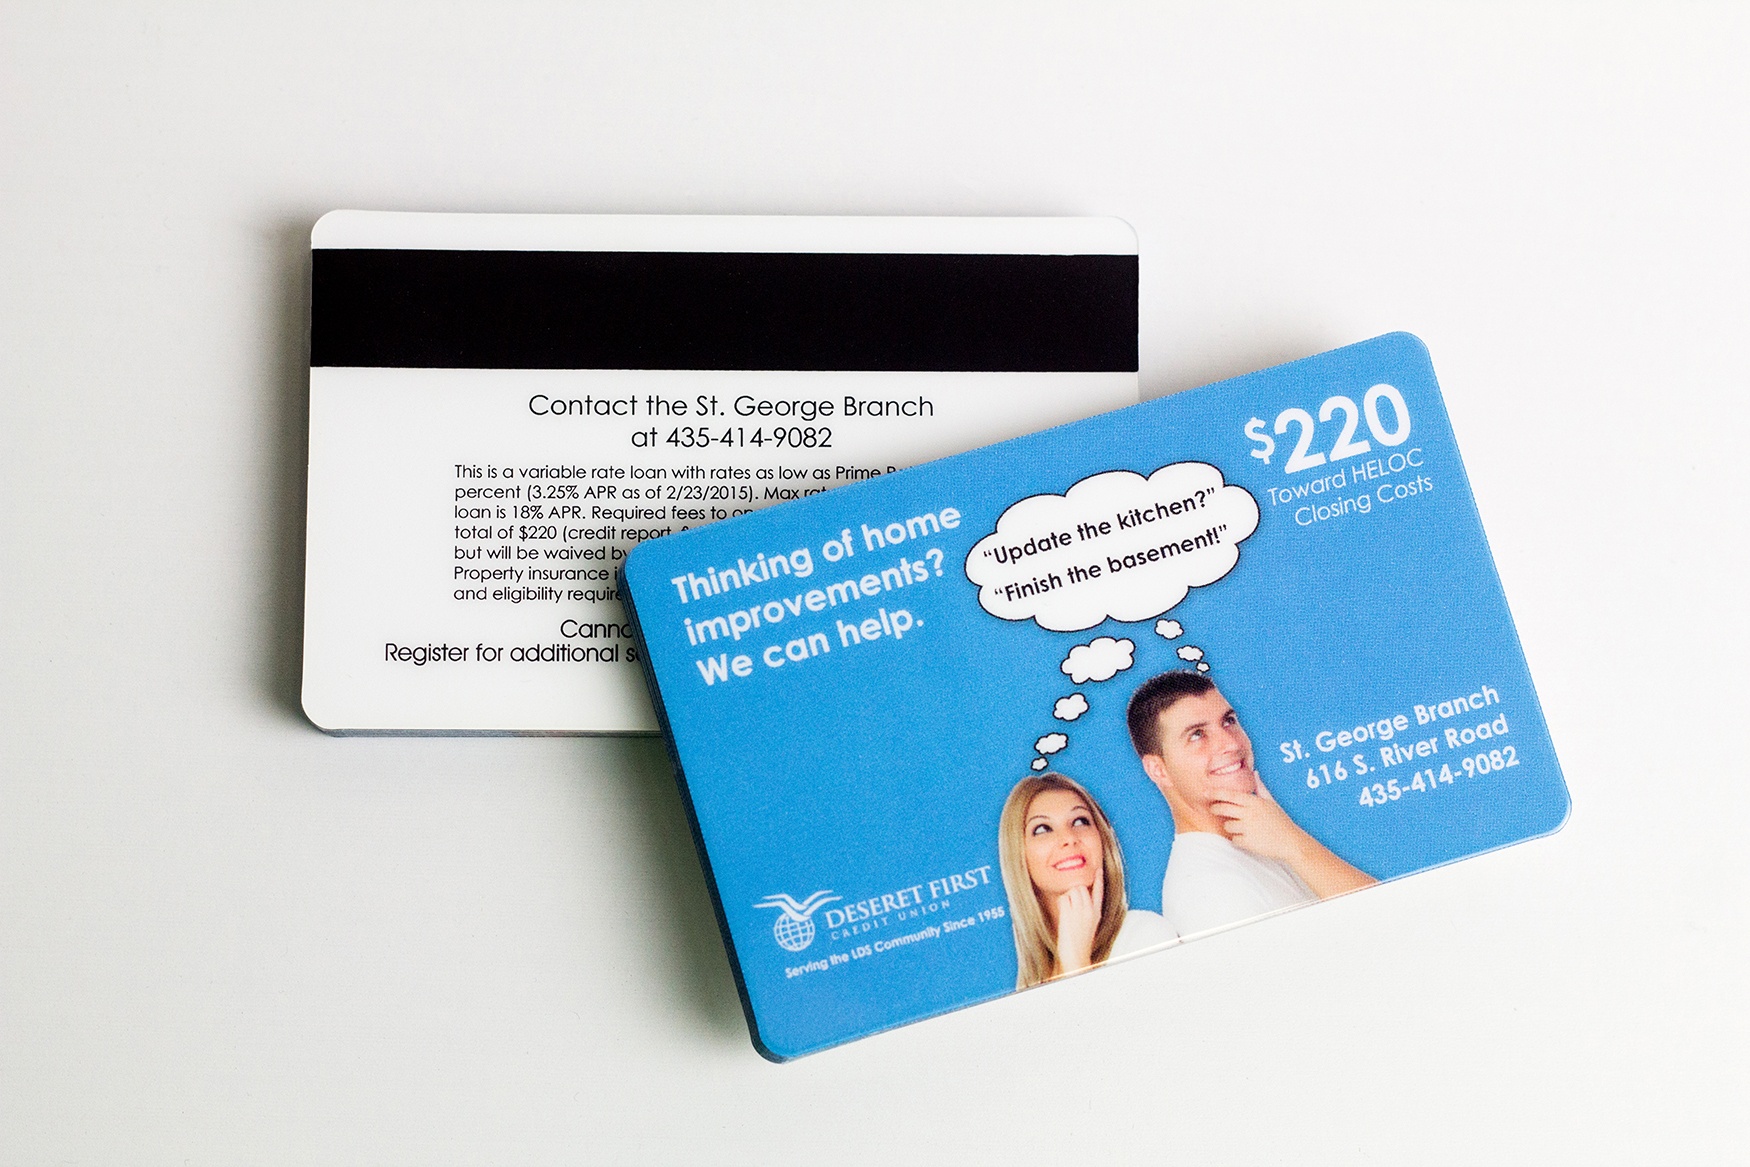 Deseret First Credit Union Discount Card